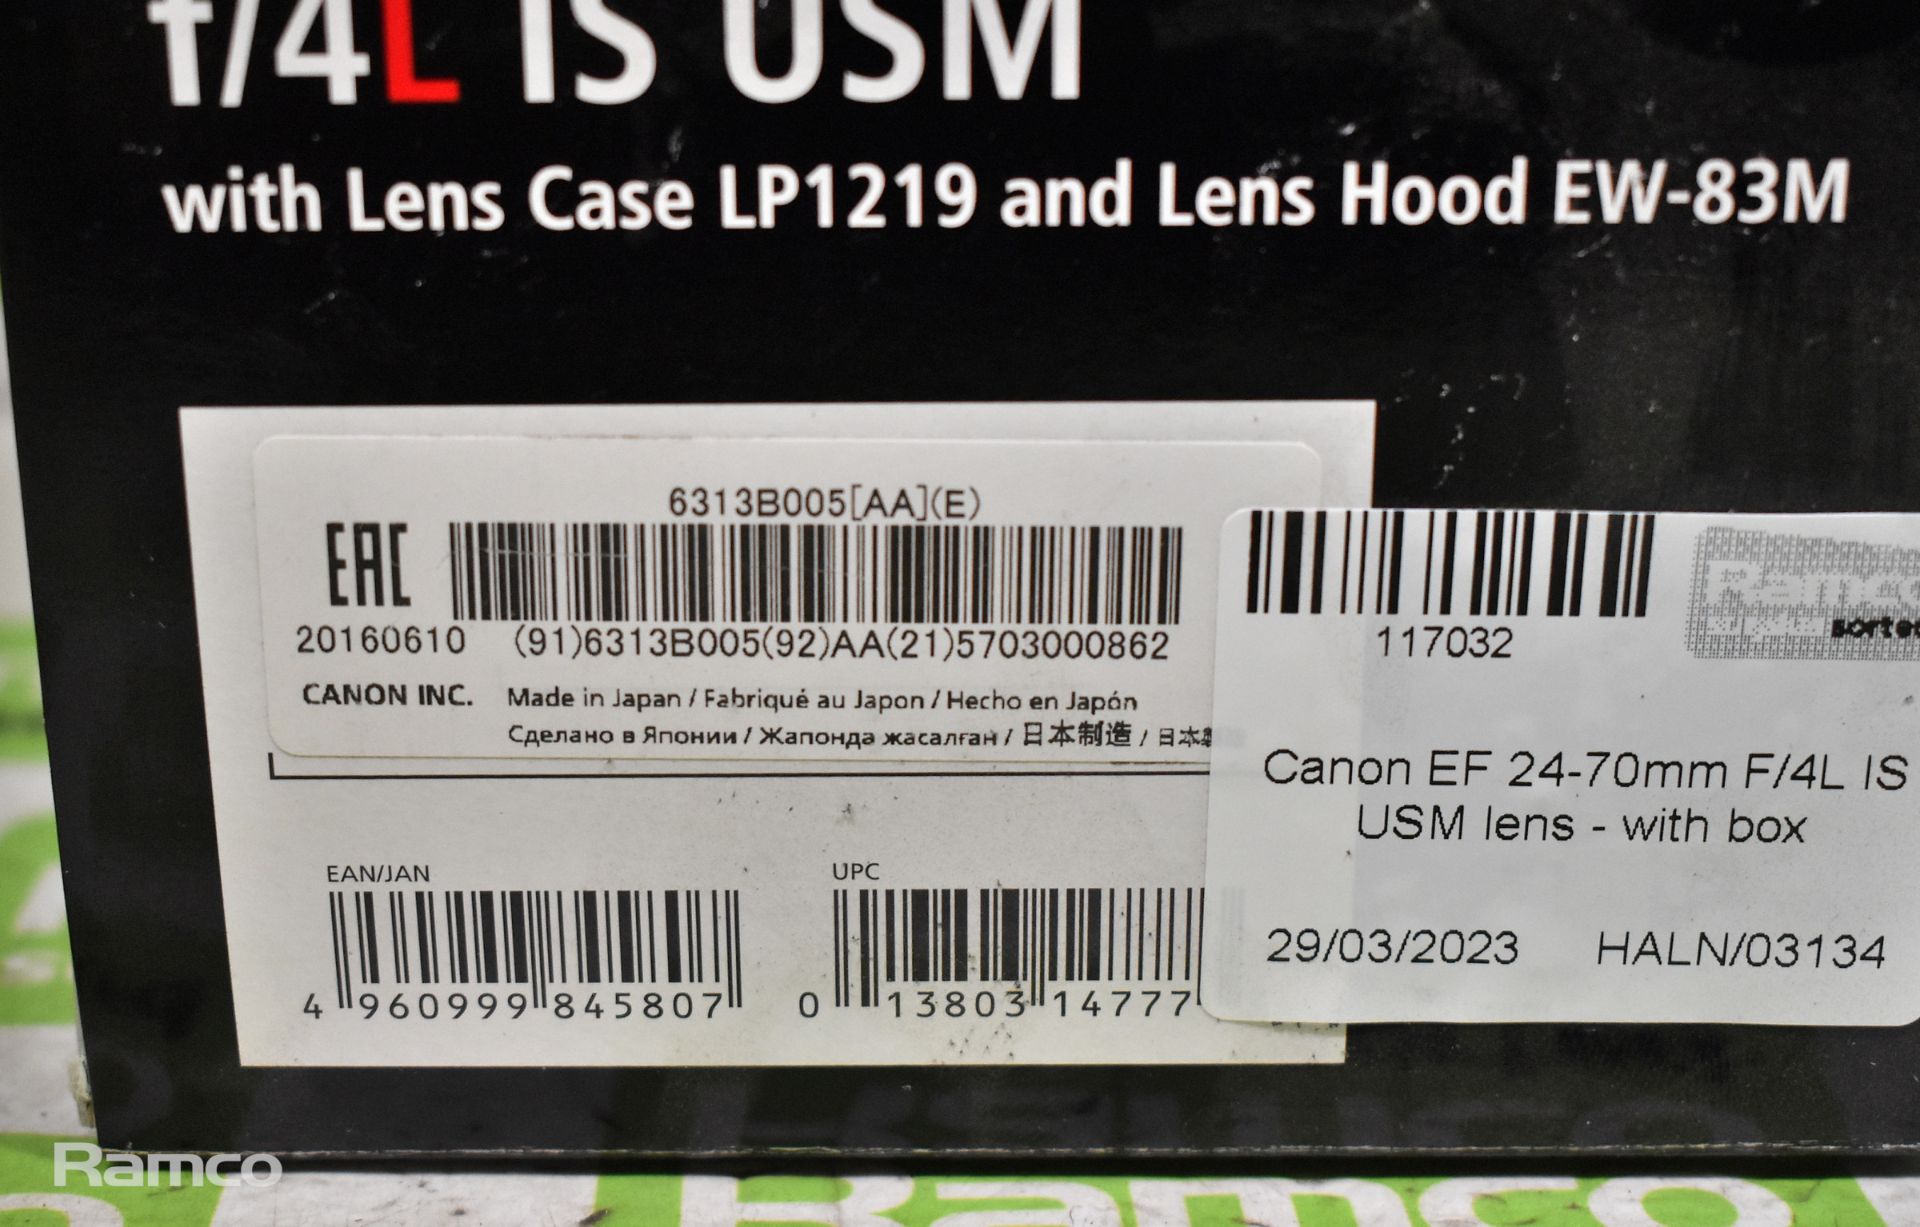 Canon EF 24-70mm F/4L IS USM lens - with box - Image 10 of 10